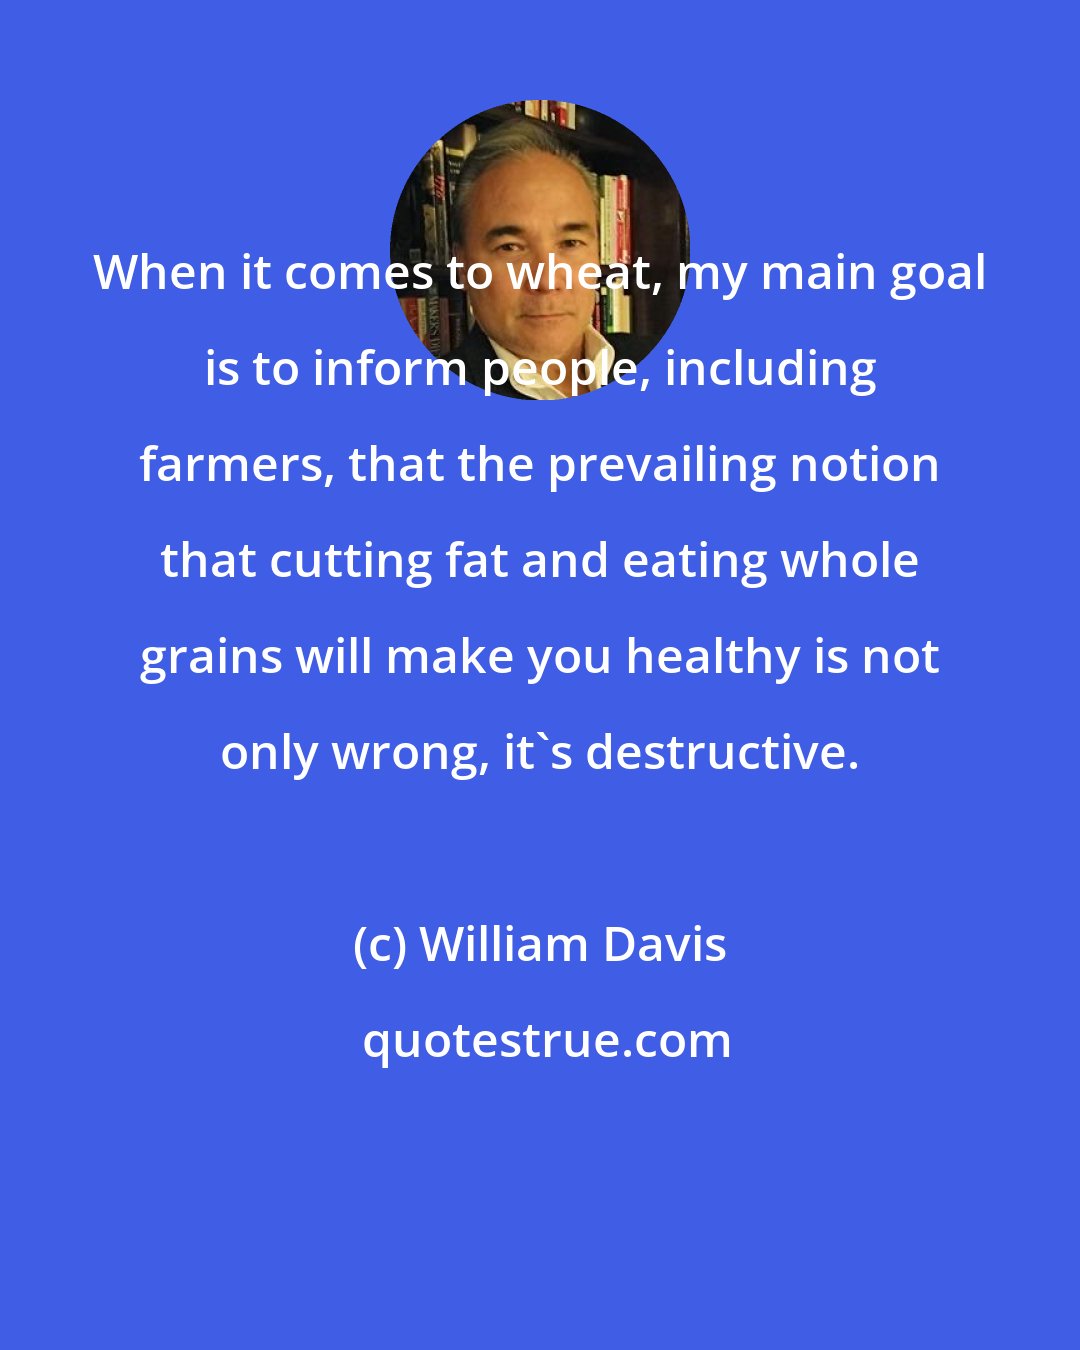 William Davis: When it comes to wheat, my main goal is to inform people, including farmers, that the prevailing notion that cutting fat and eating whole grains will make you healthy is not only wrong, it's destructive.